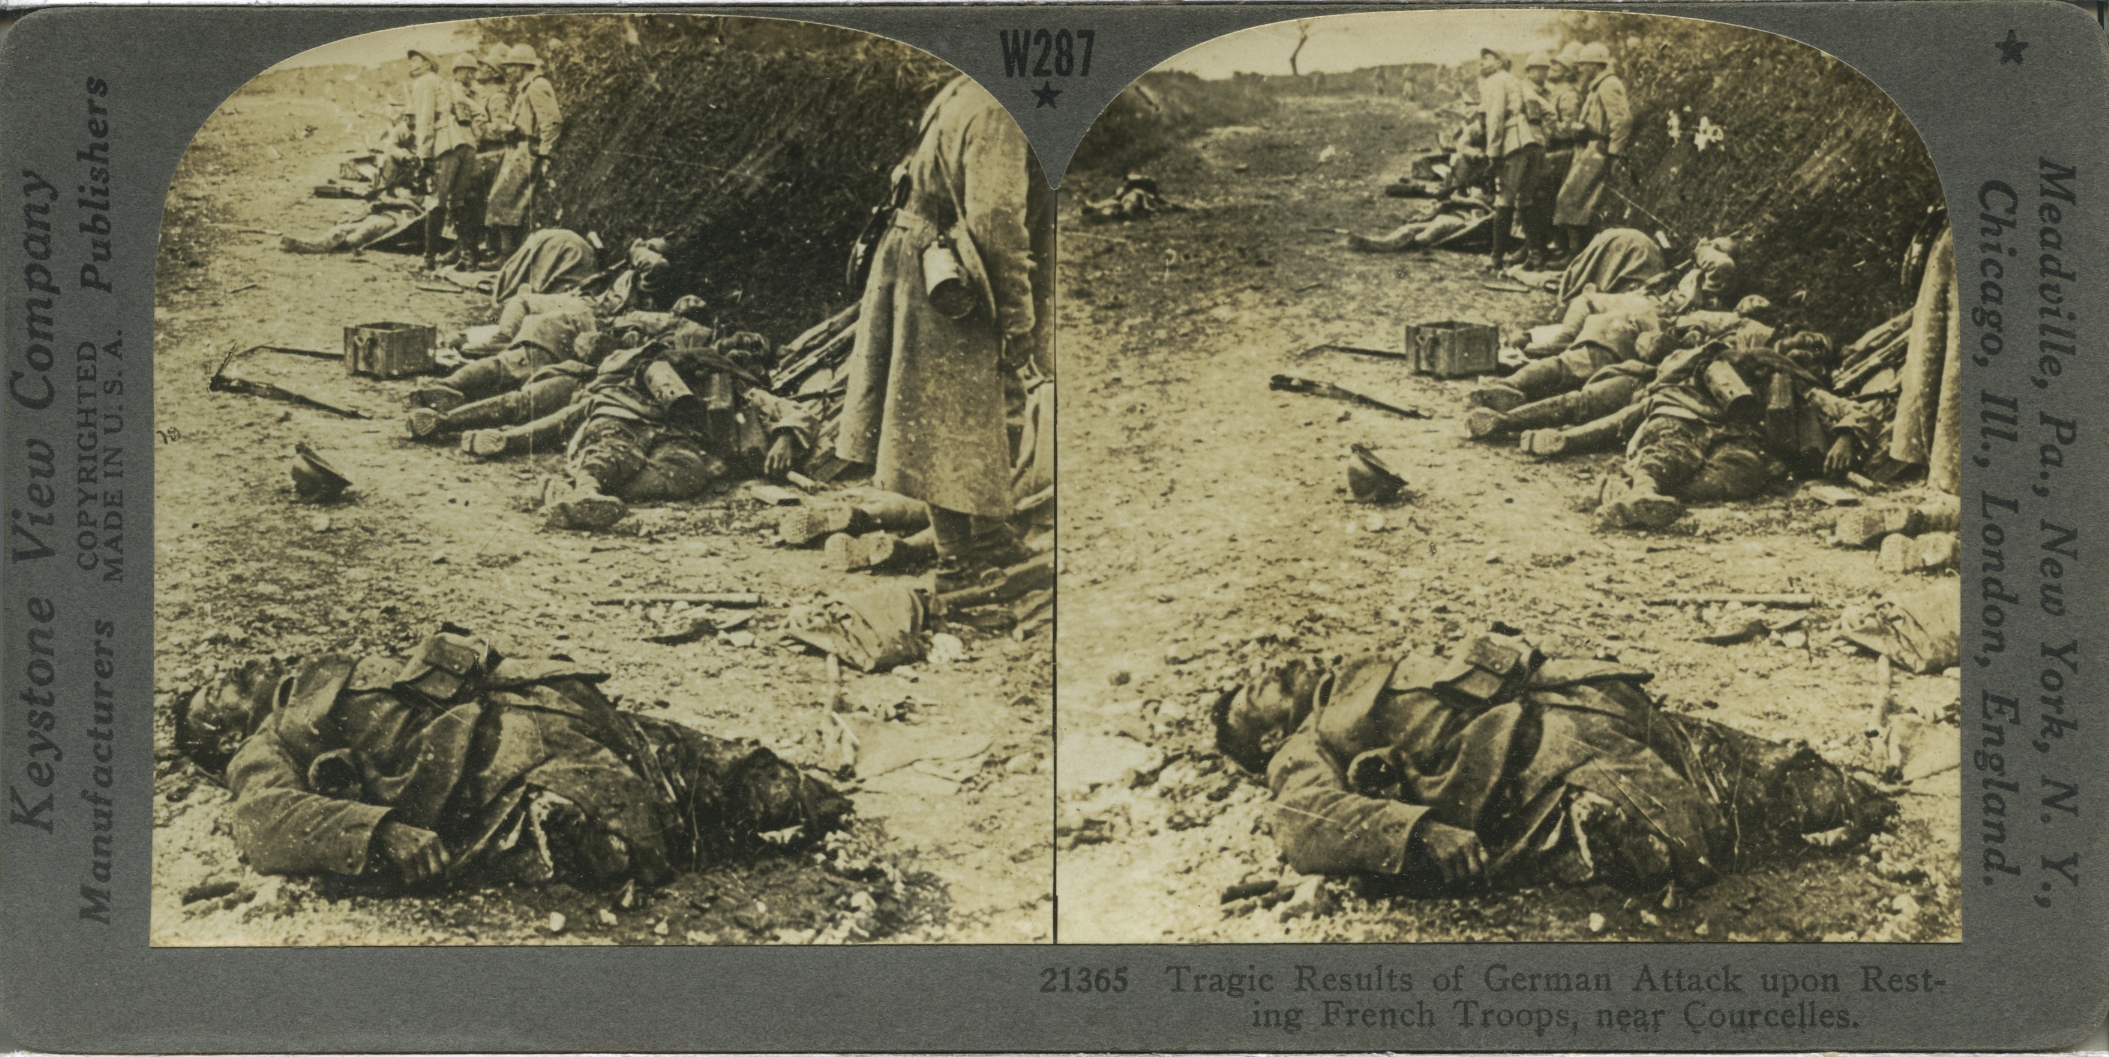 Tragic Results of German Attack upon Resting French Troops, near Courcelles